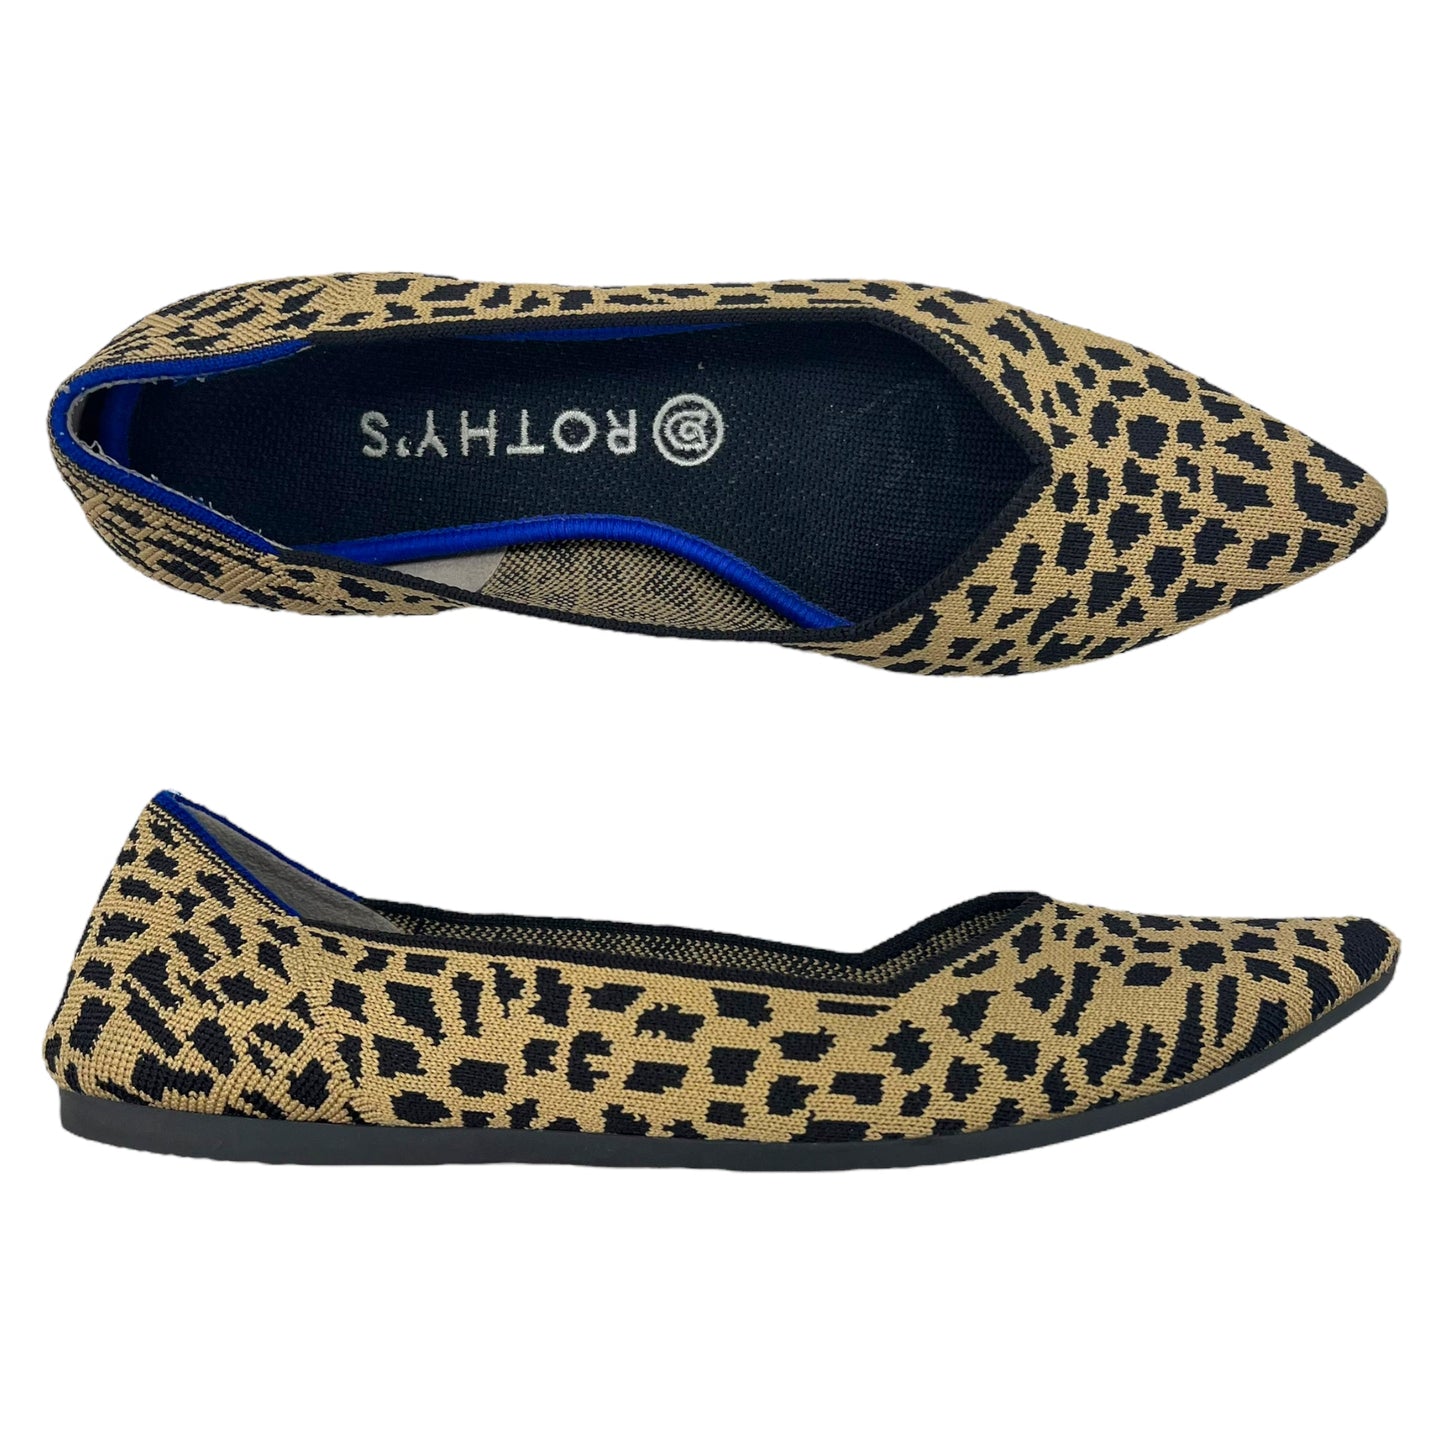 Shoes Flats By Rothys  Size: 9